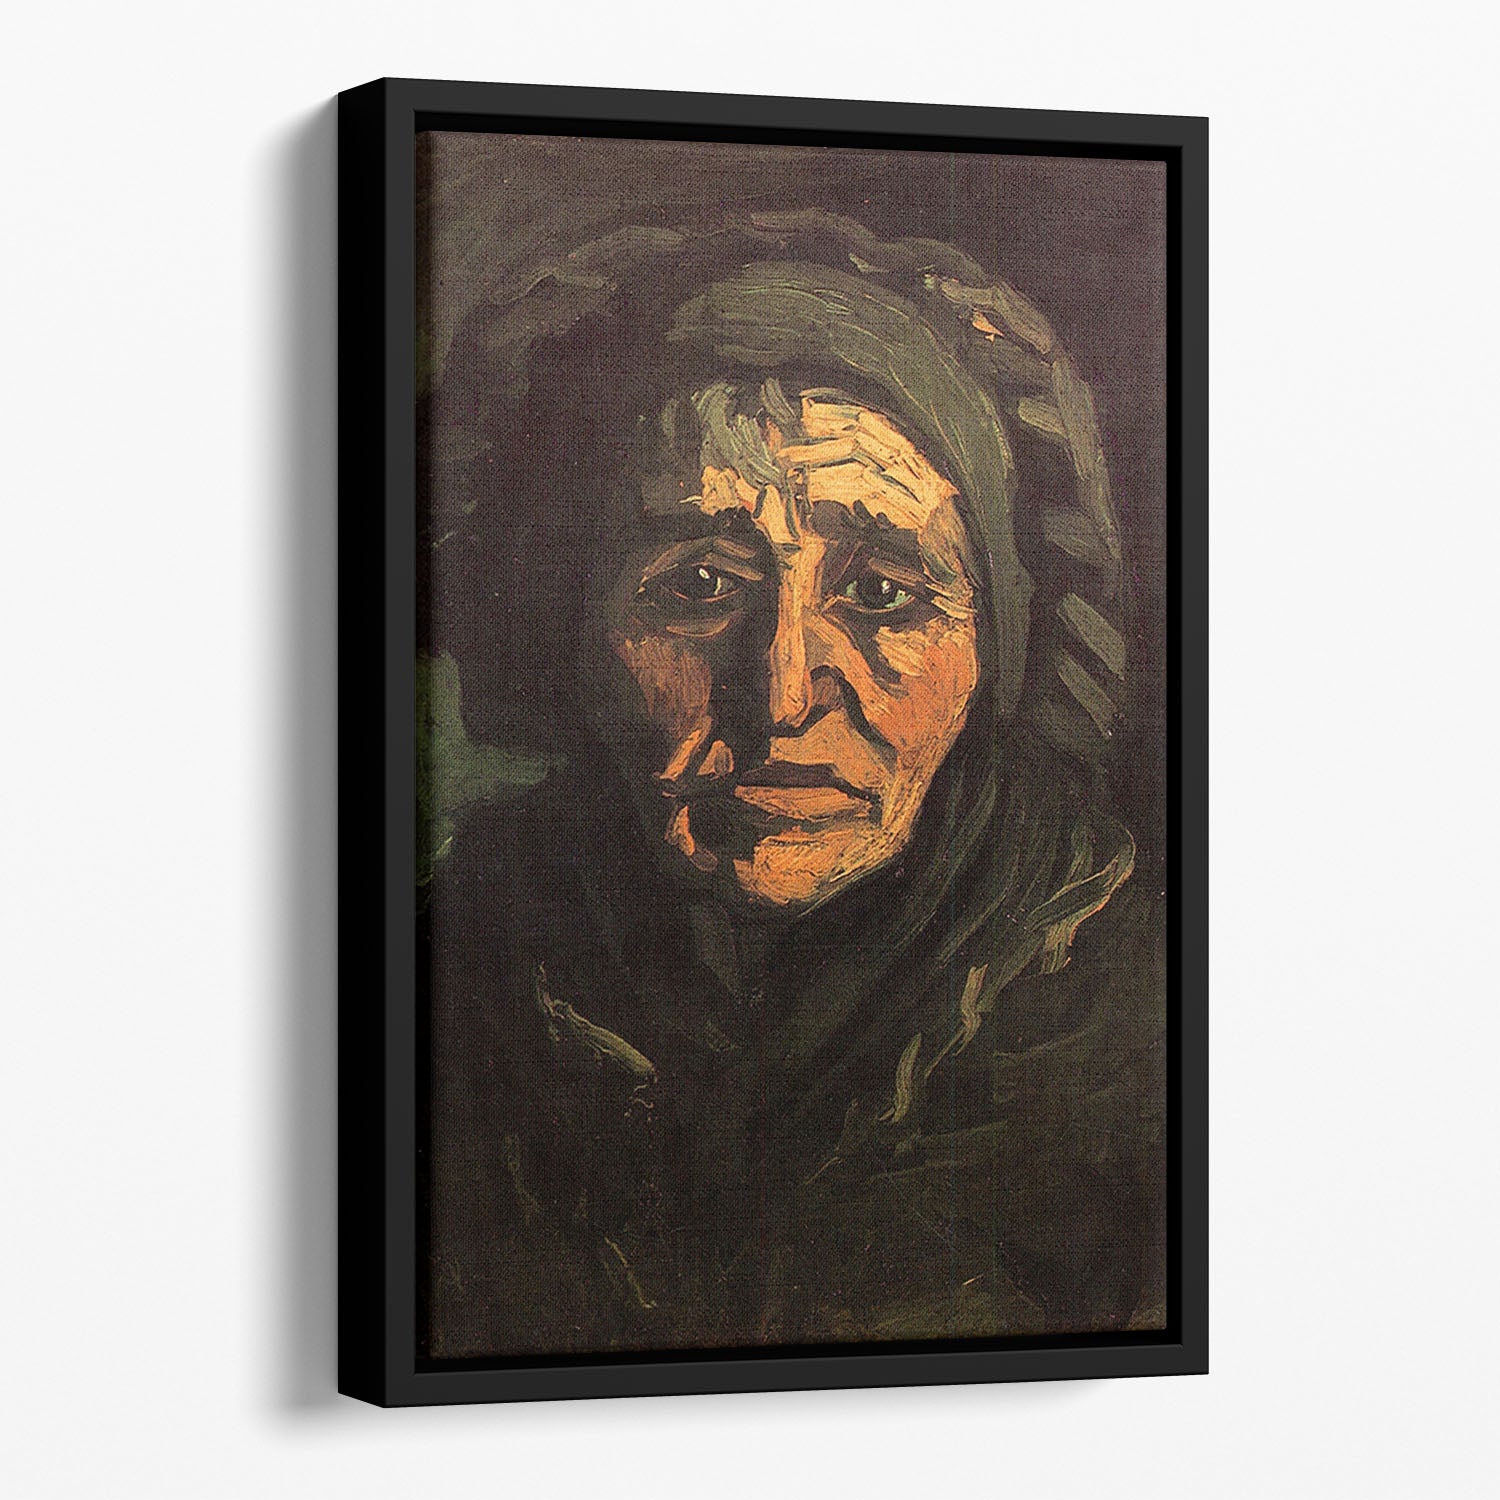 Head of a Peasant Woman with Greenish Lace Cap by Van Gogh Floating Framed Canvas